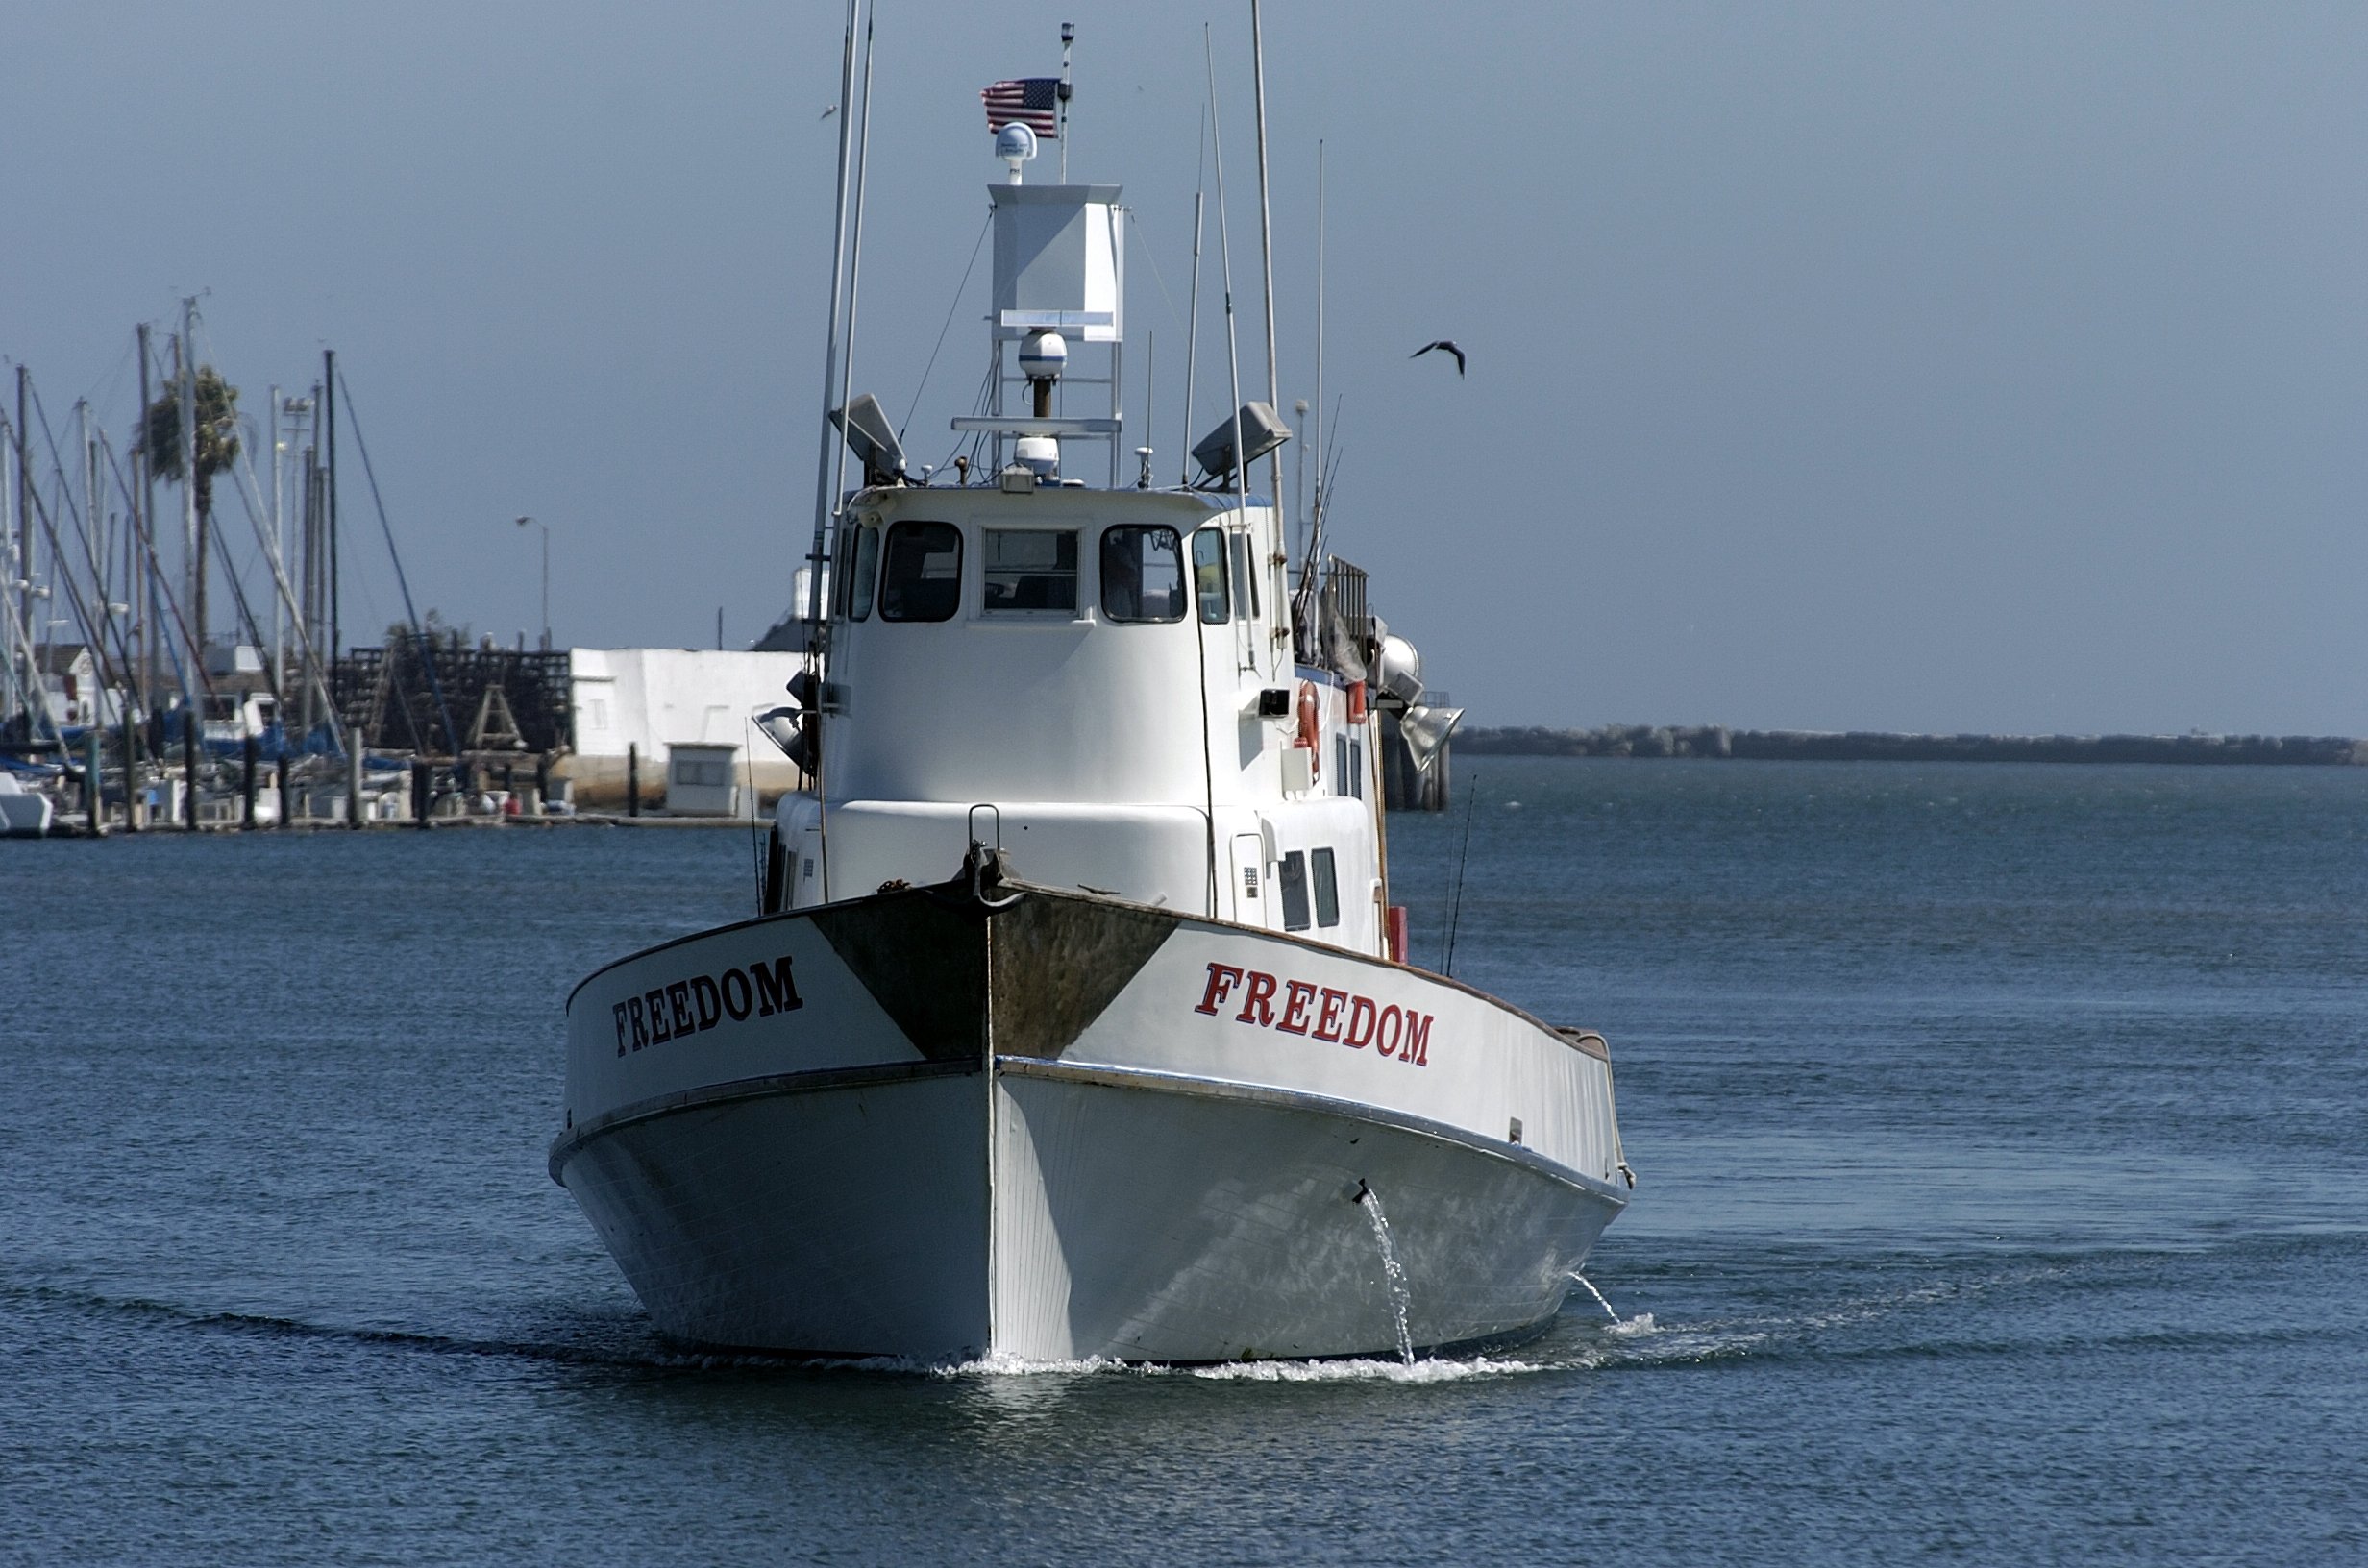 The fishing boat Freedom on August 22, 2005, in San Pedro, California from which Olivia Newton-John's boyfriend Patrick Kim McDermott disappeared | Source: Getty Images